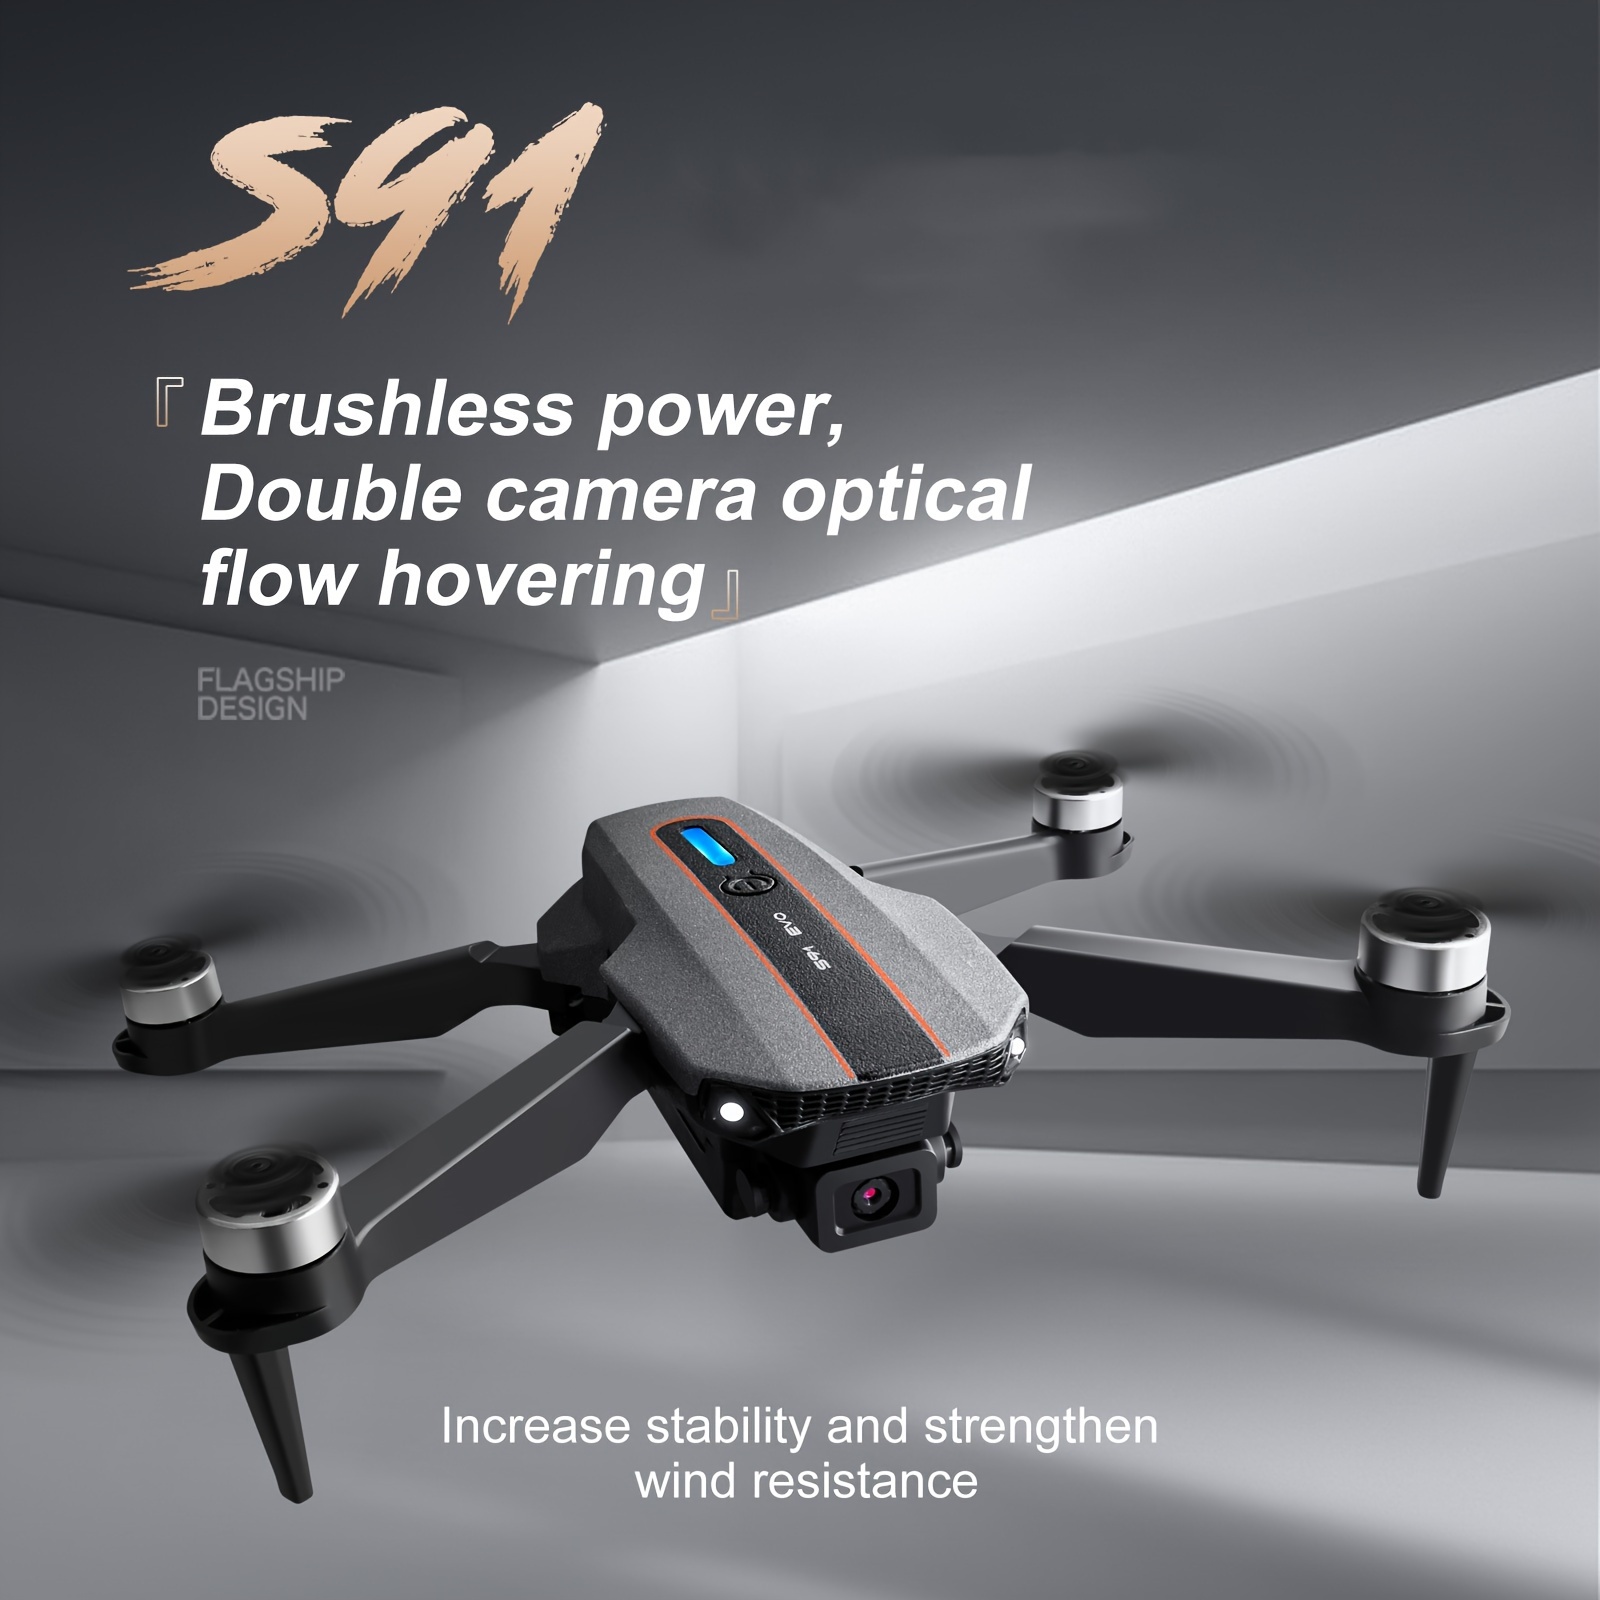 s91 remote remote control drone with hd dual camera adjustable headless mode track flying one key surround smart follow brushless motor drone self with optical flow positioning function details 0